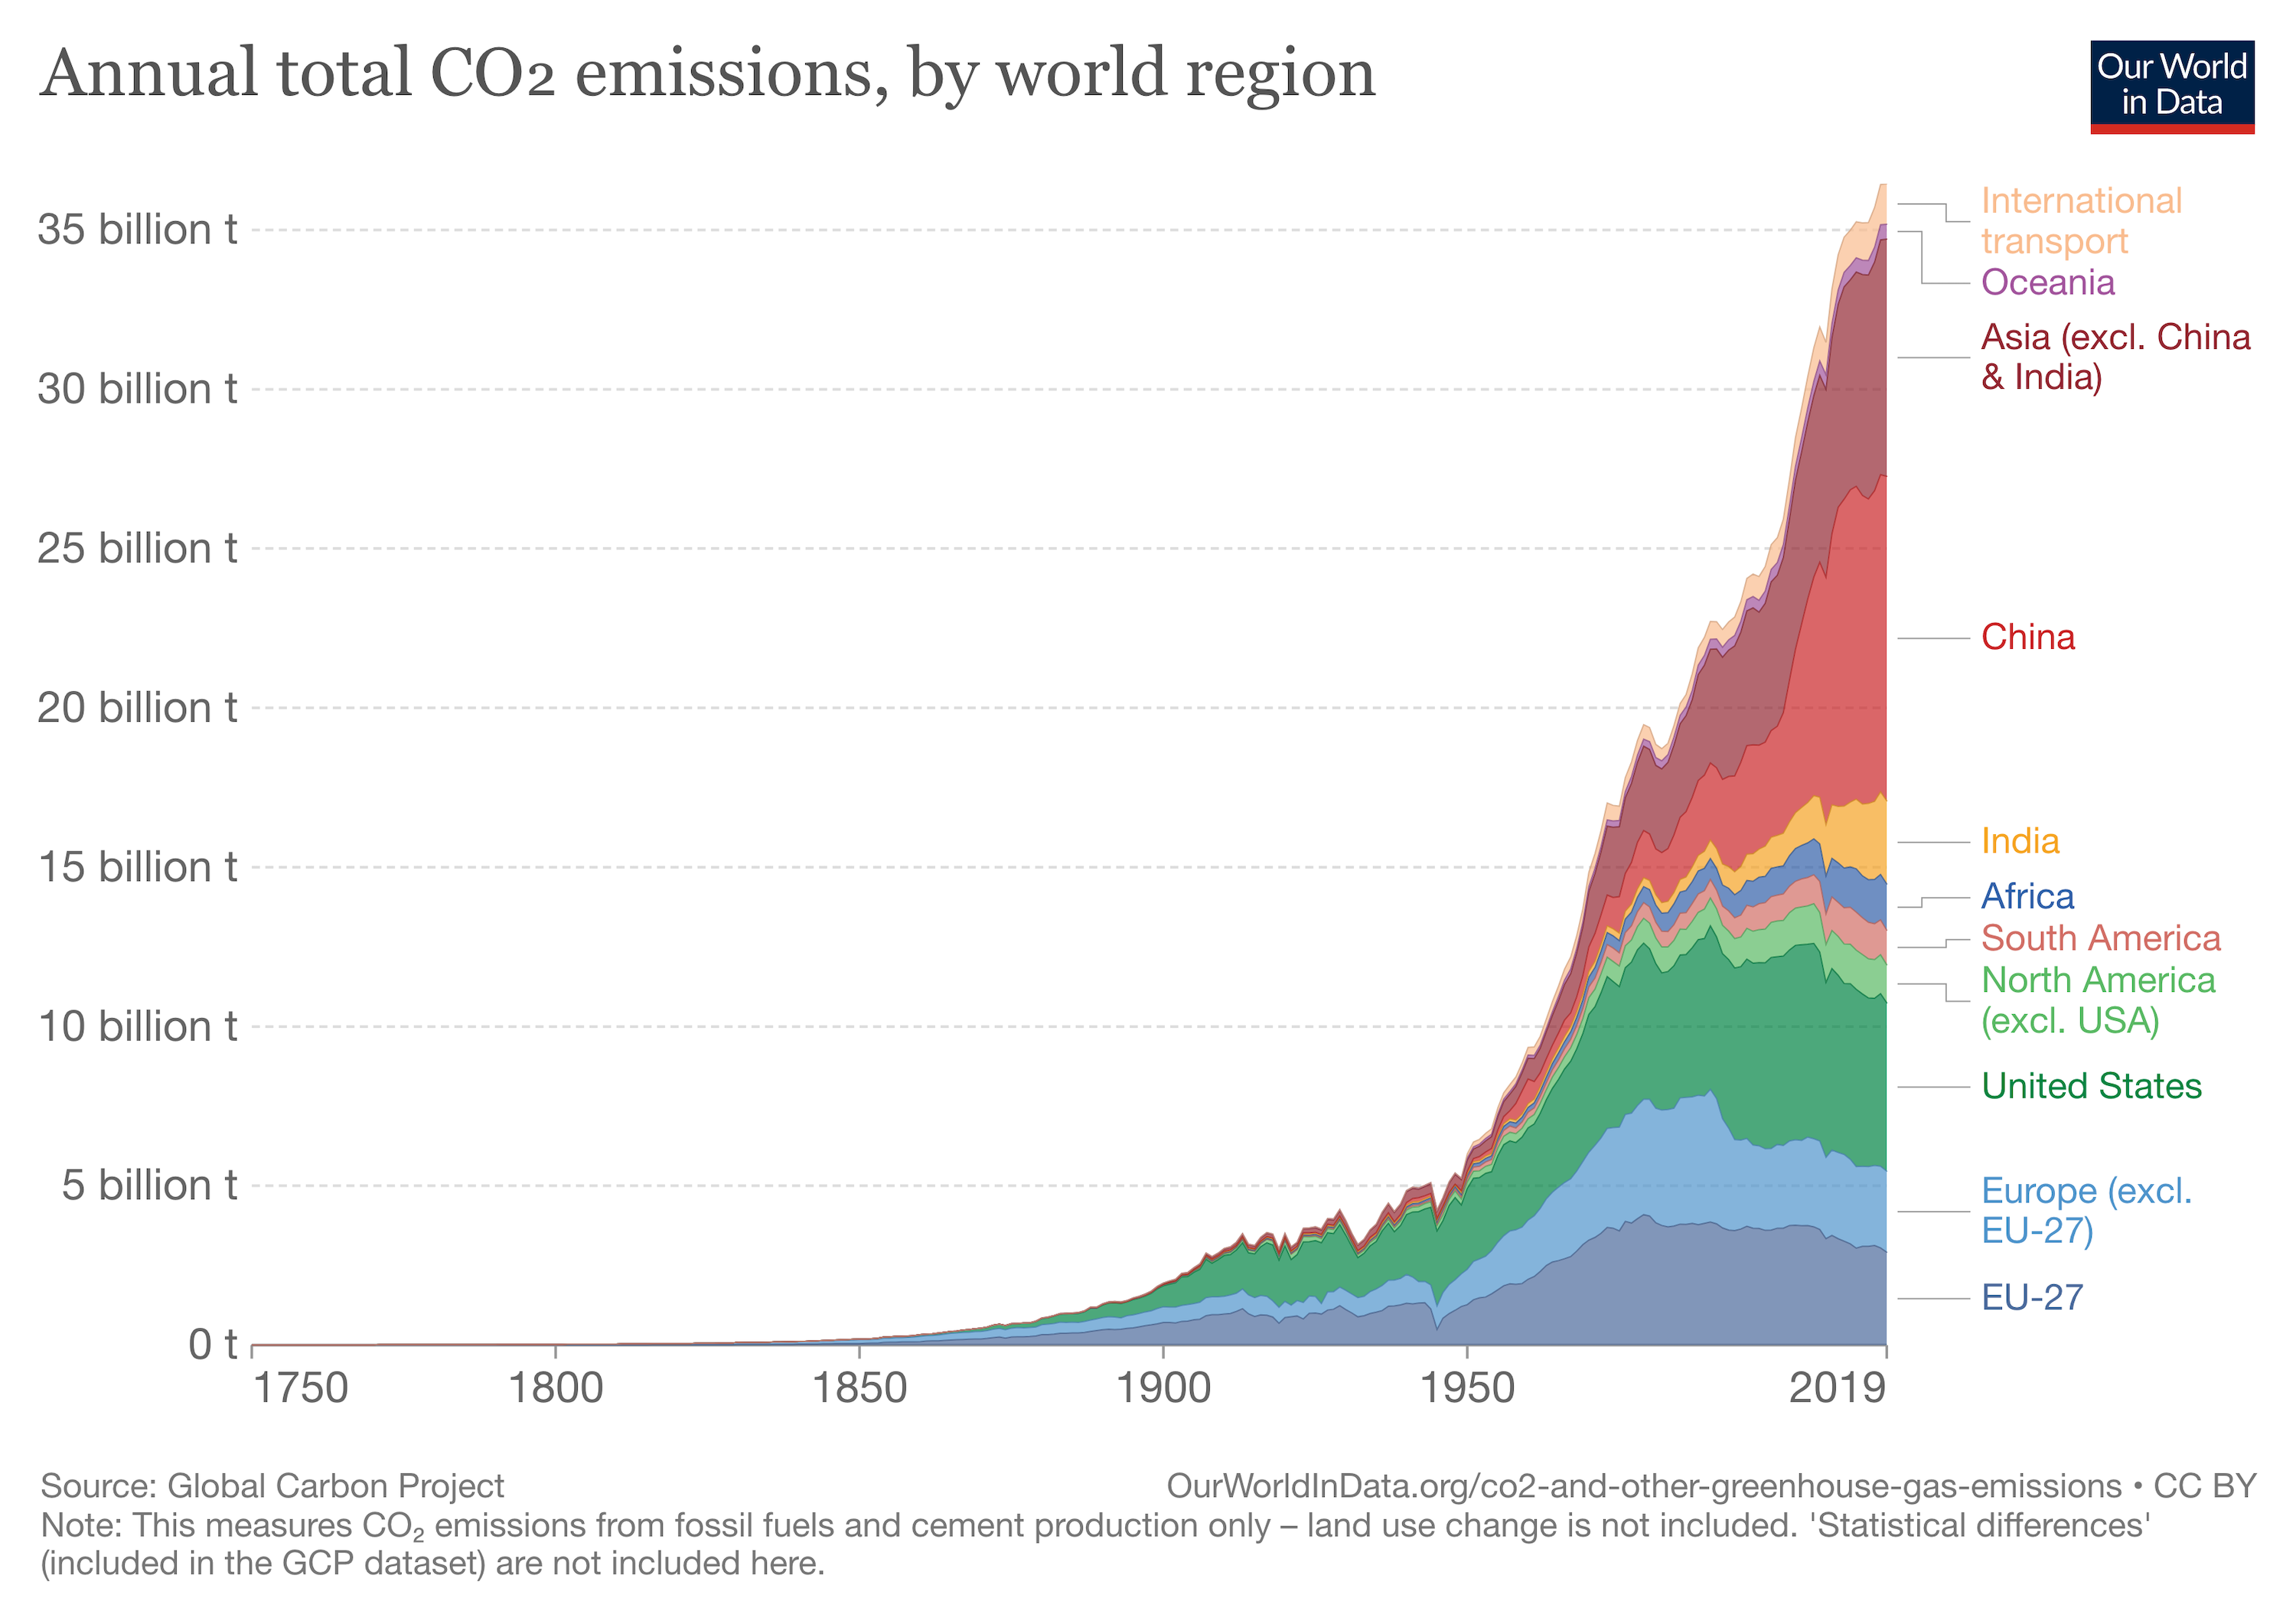 A chart showing how CO2 emissions have increased with time in different world regions. China has shown the biggest increase.